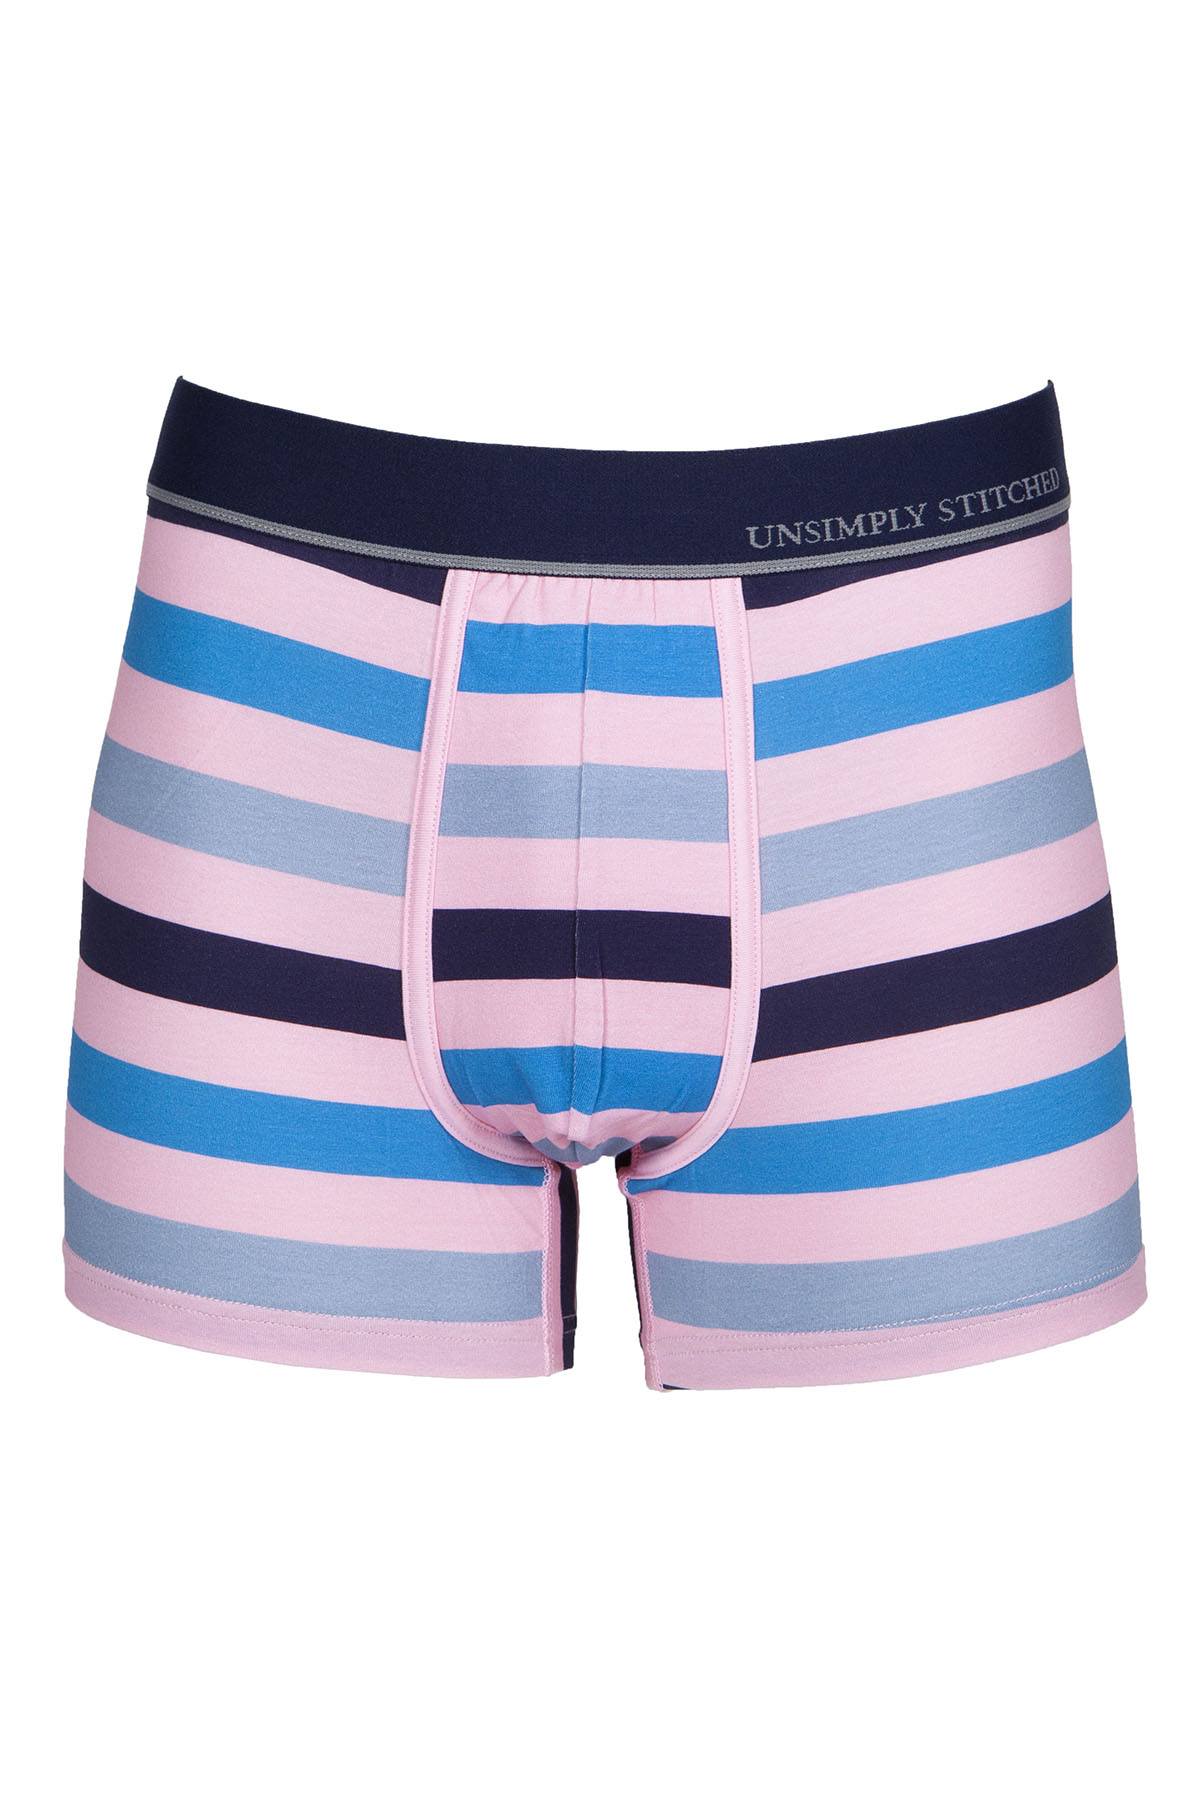 Unsimply Stitched Pink Colored Stripe Trunk